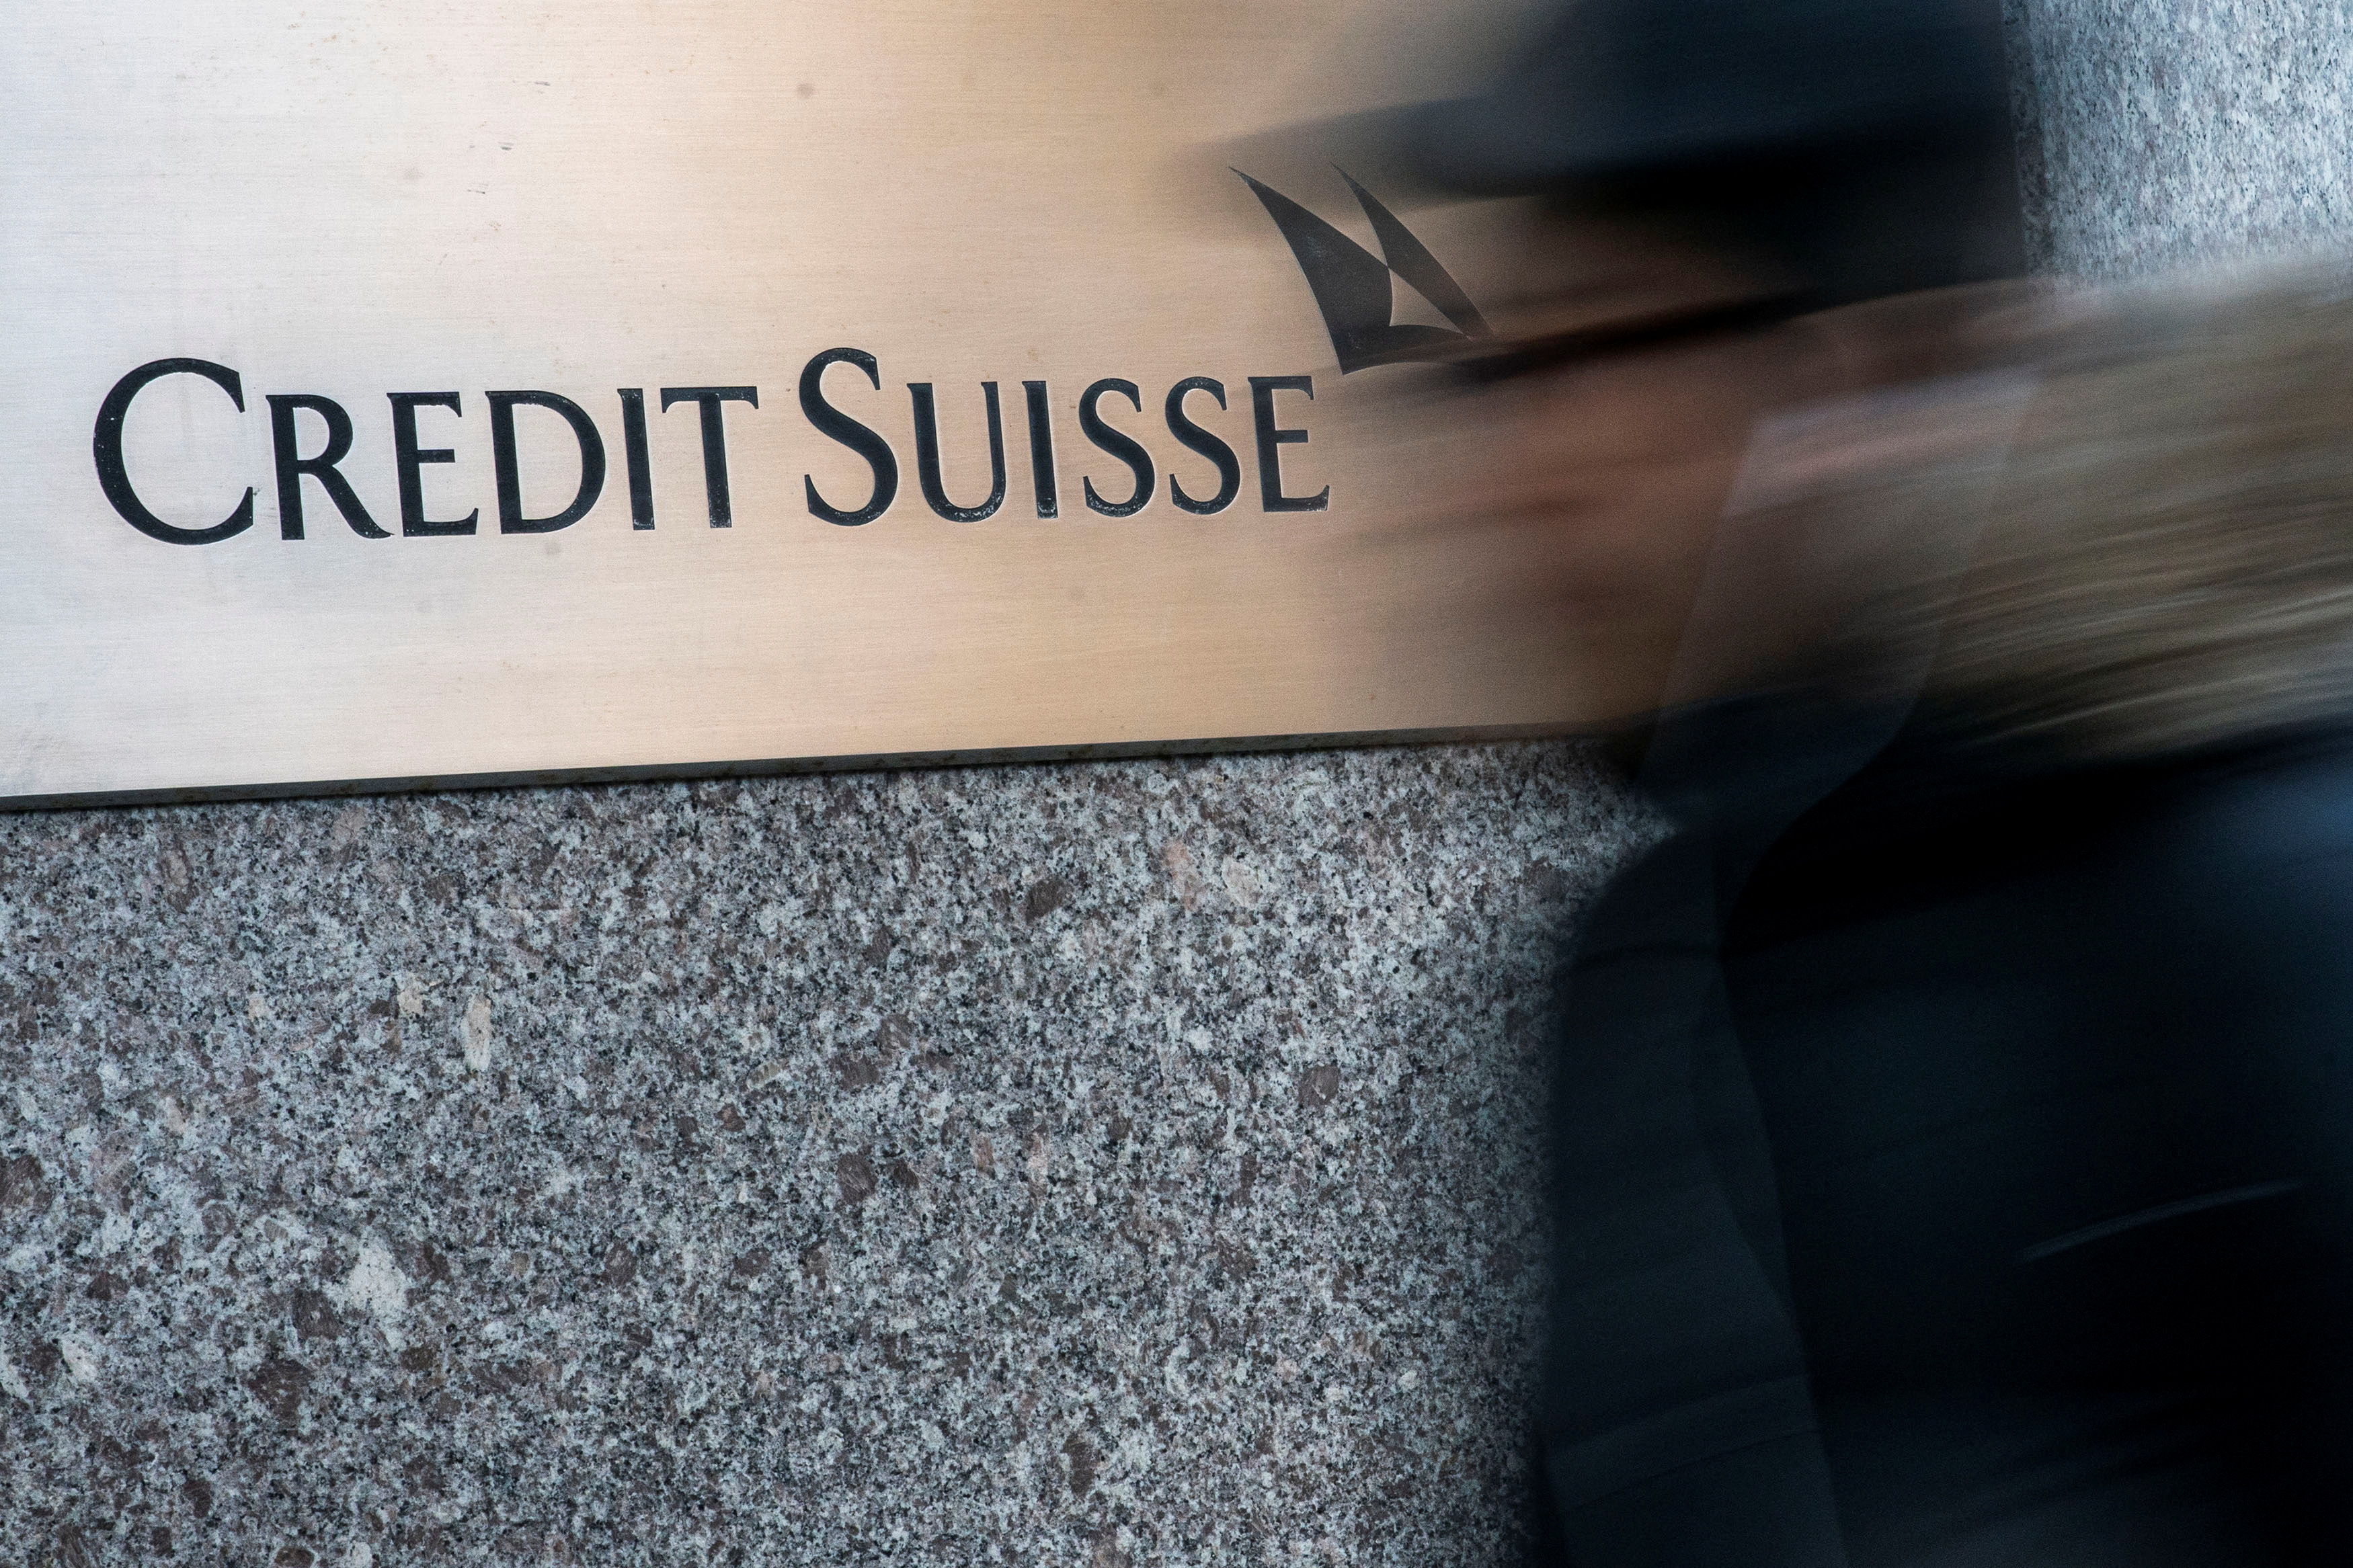 A man walks near Credit Suisse bank headquarters in New York